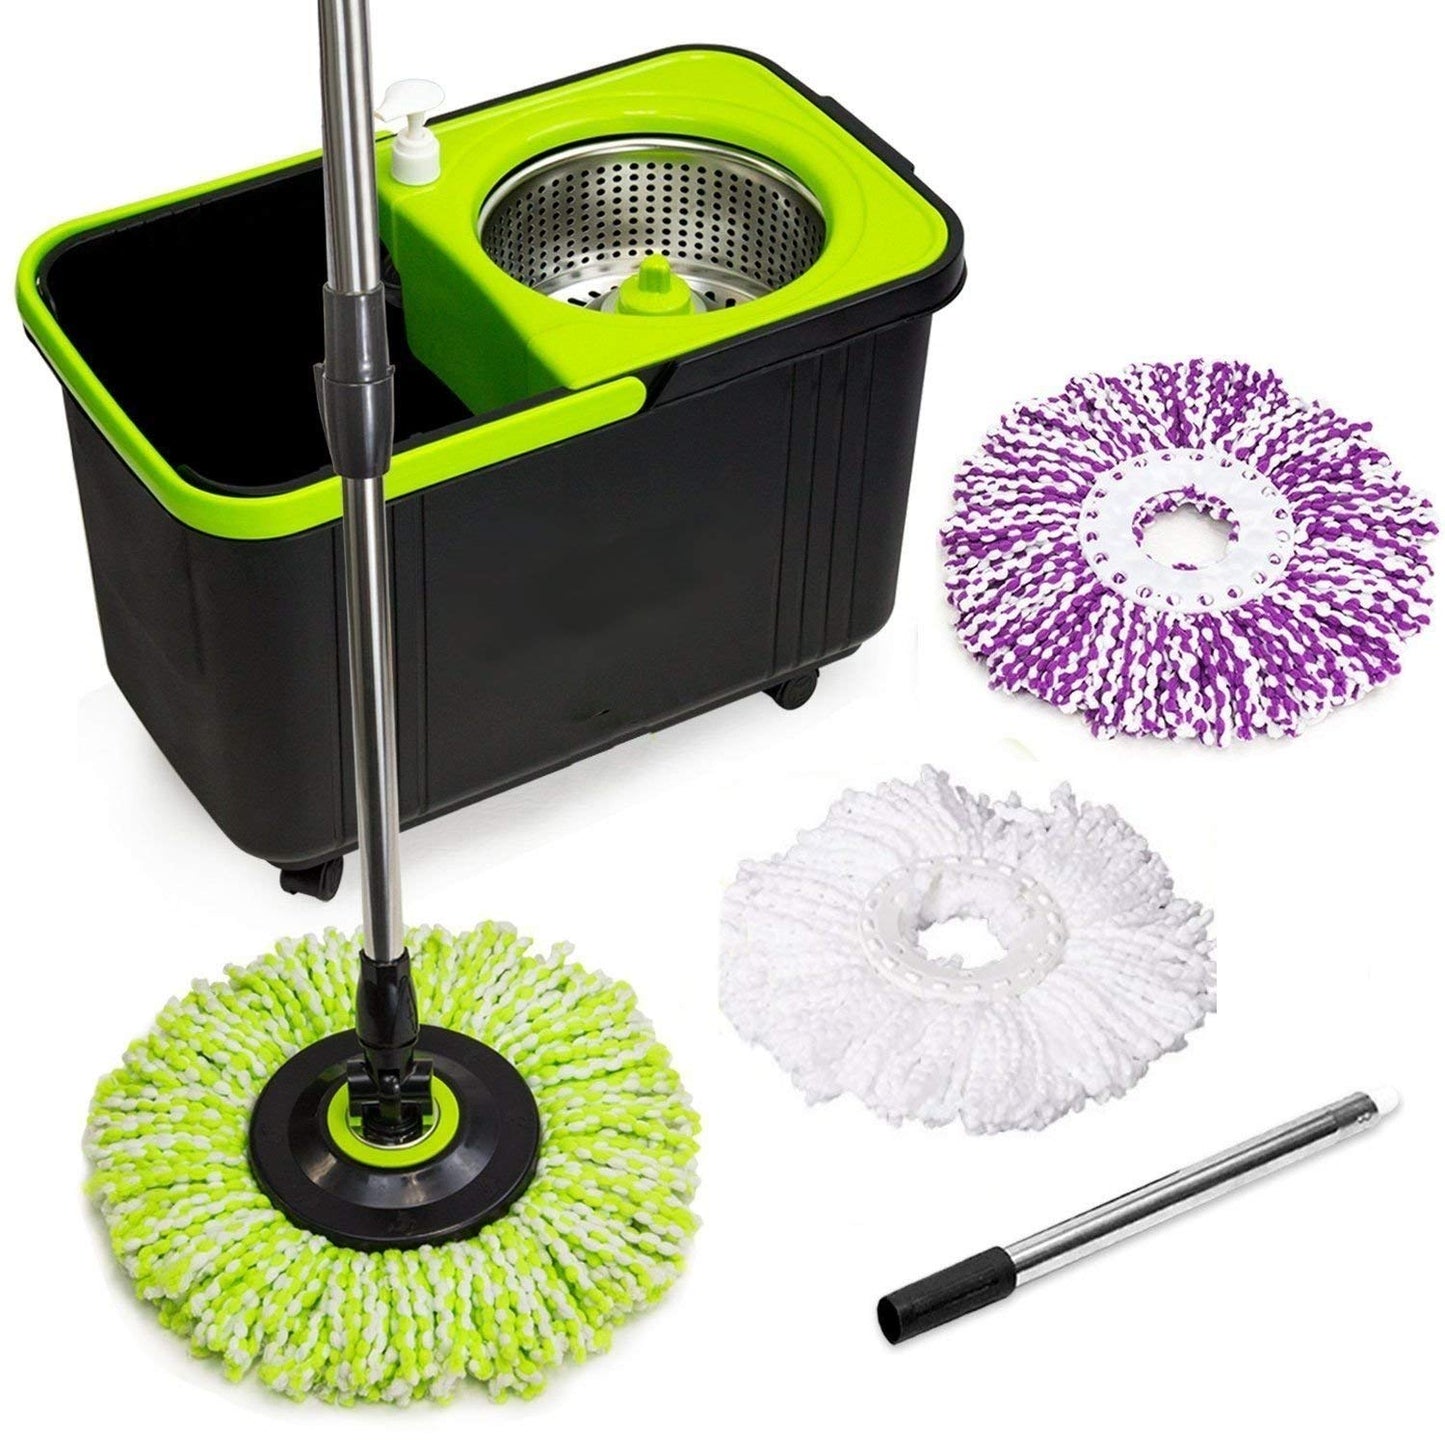 Spin Mop with 3 Mop Head Refills